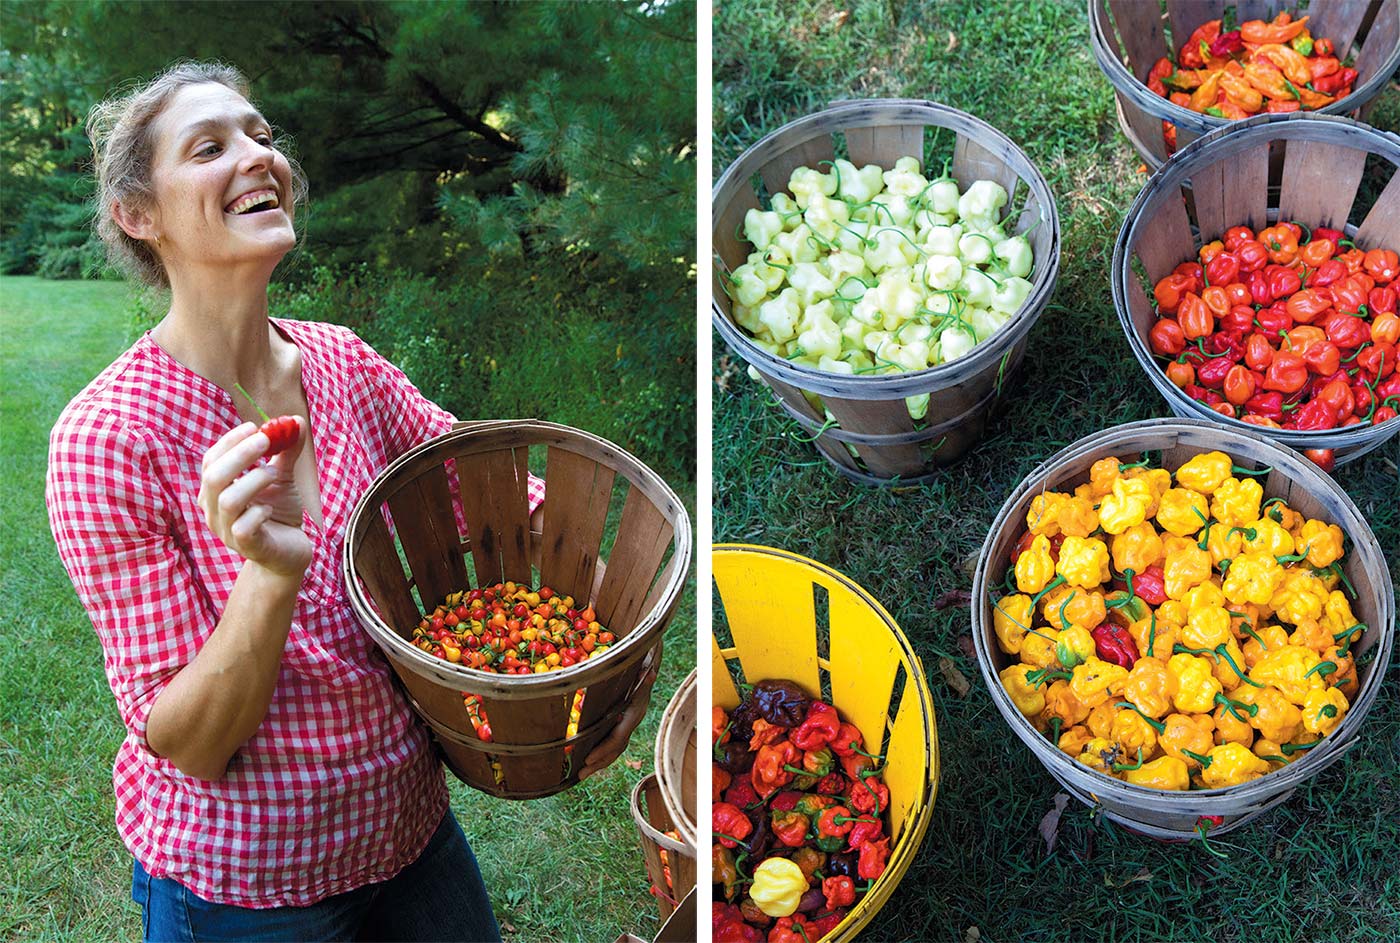 Left to right: The author picking peppers, baskets of peppers sorted for the Homesweet Homegrown CSA.